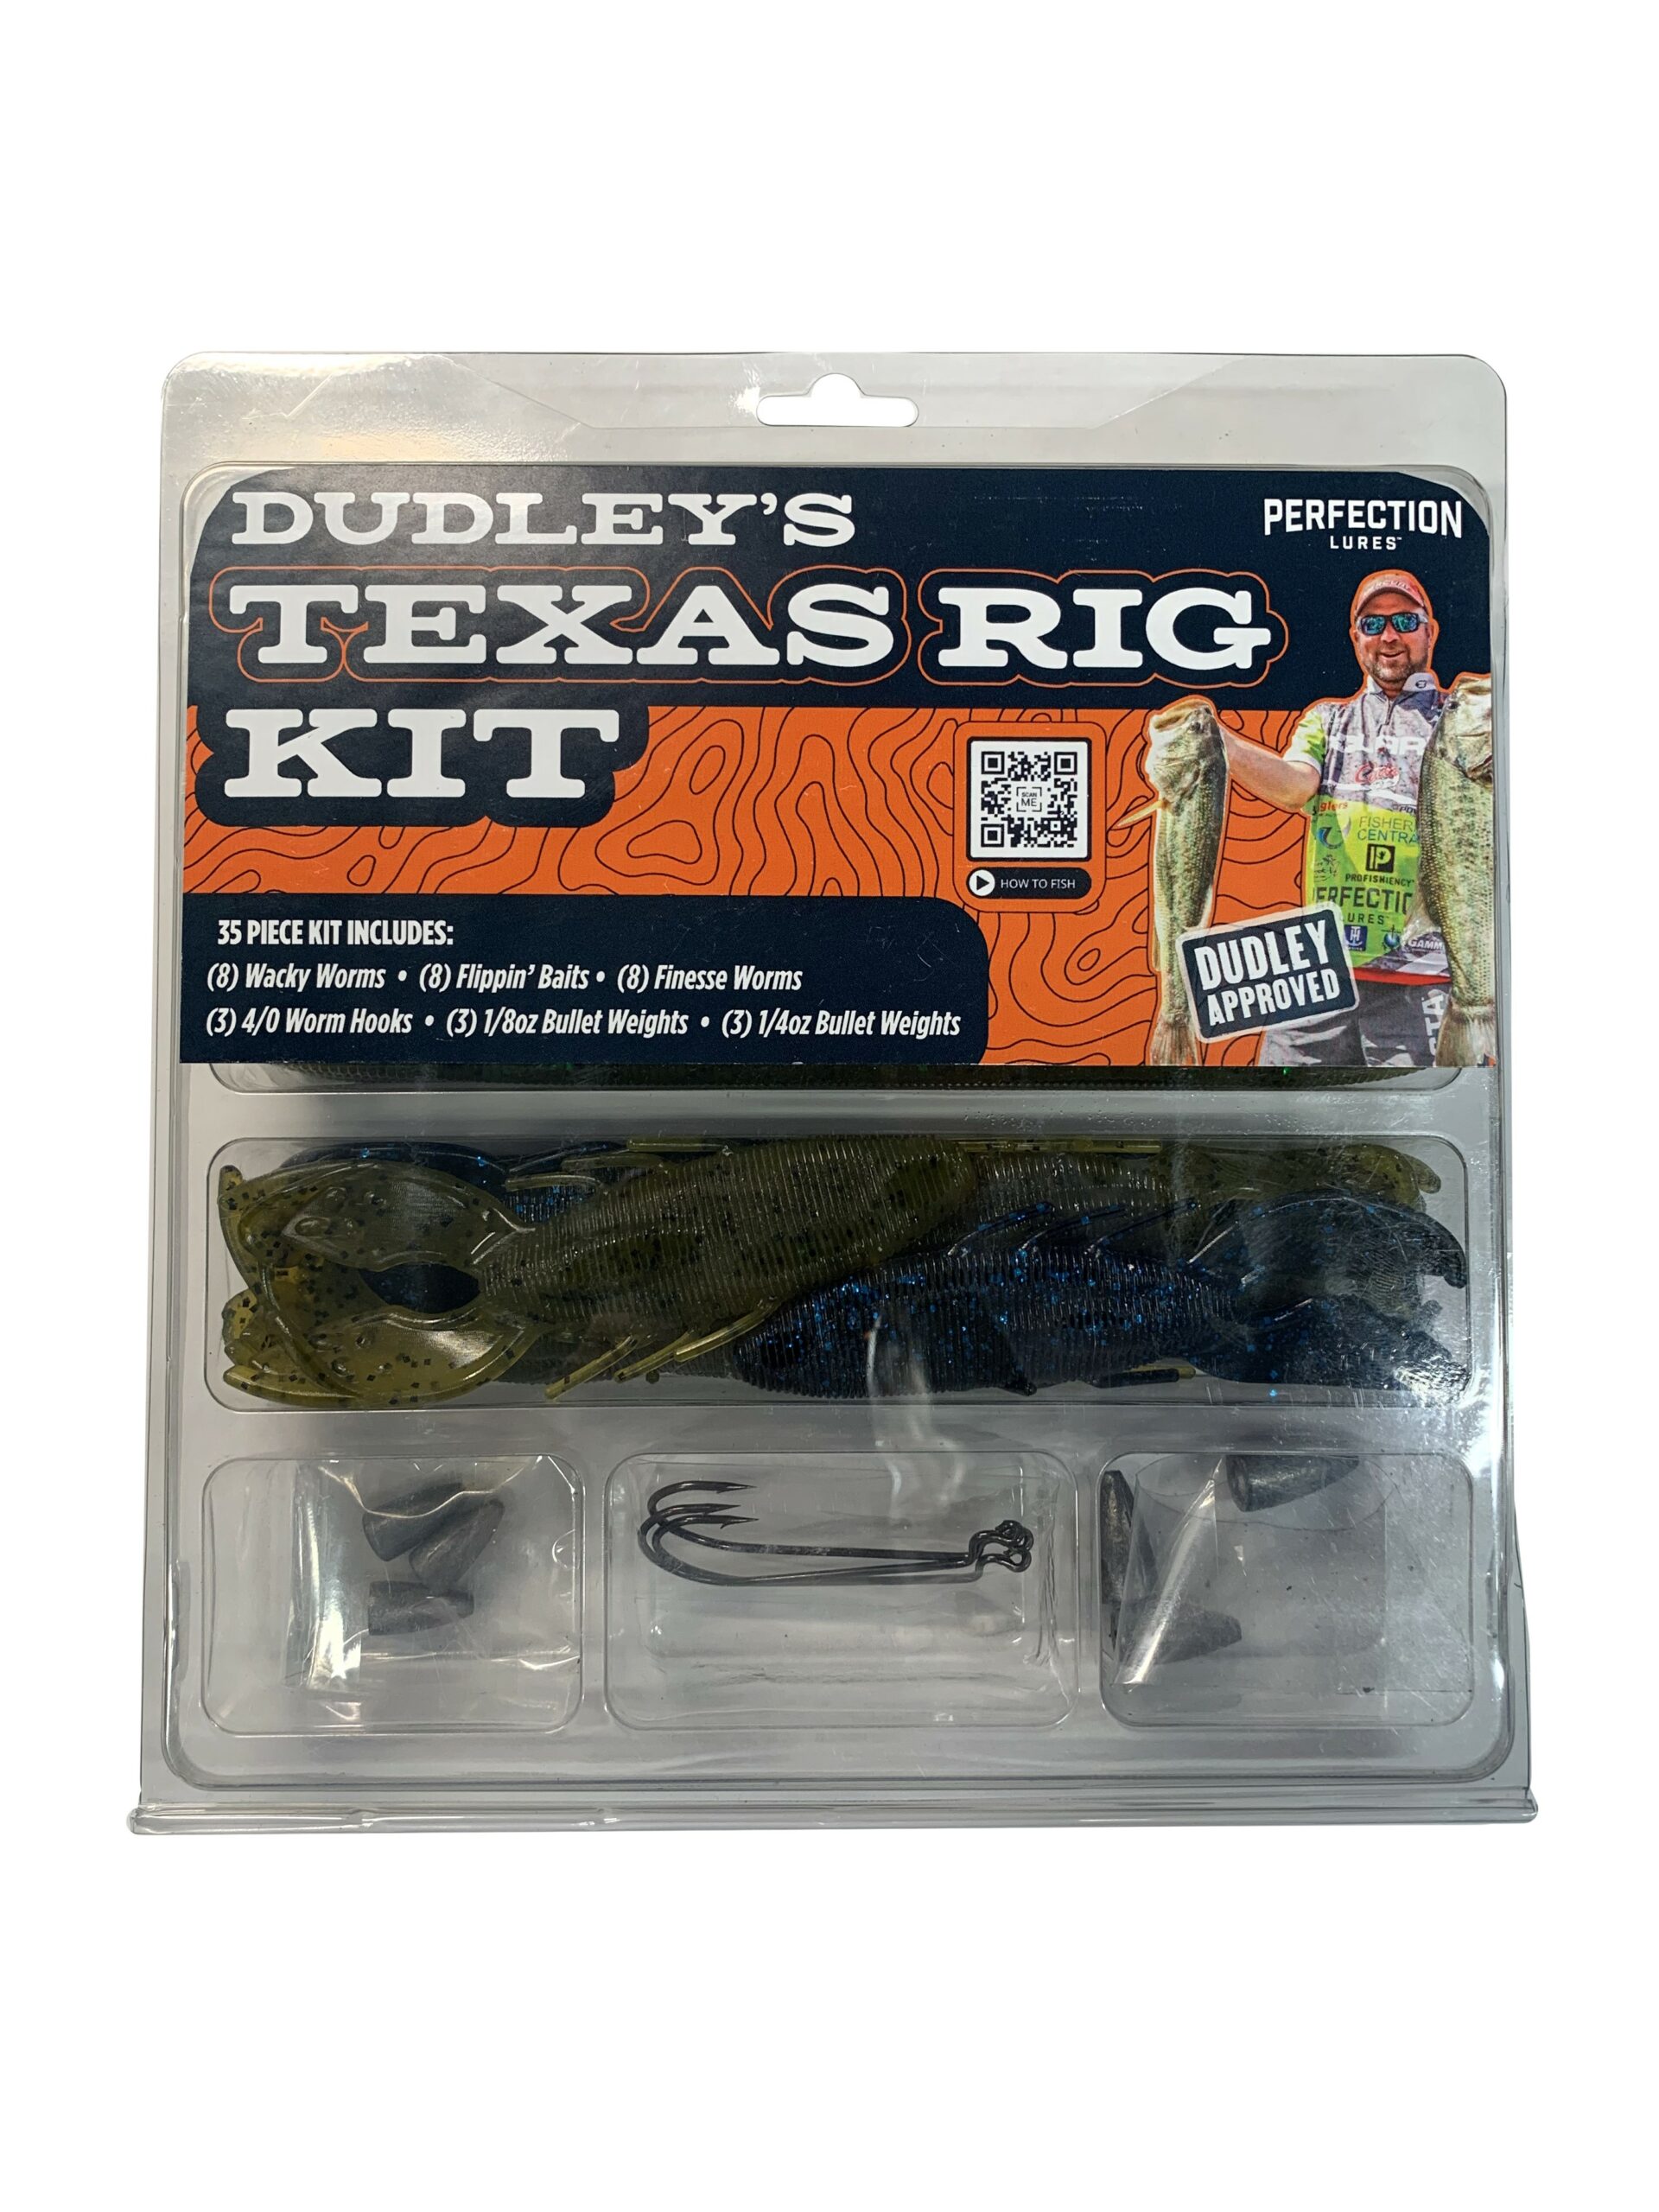 https://op1.0ps.us/original/opplanet-perfection-lures-dudleys-35-piece-texas-rig-kit-dd35pctrkit-main